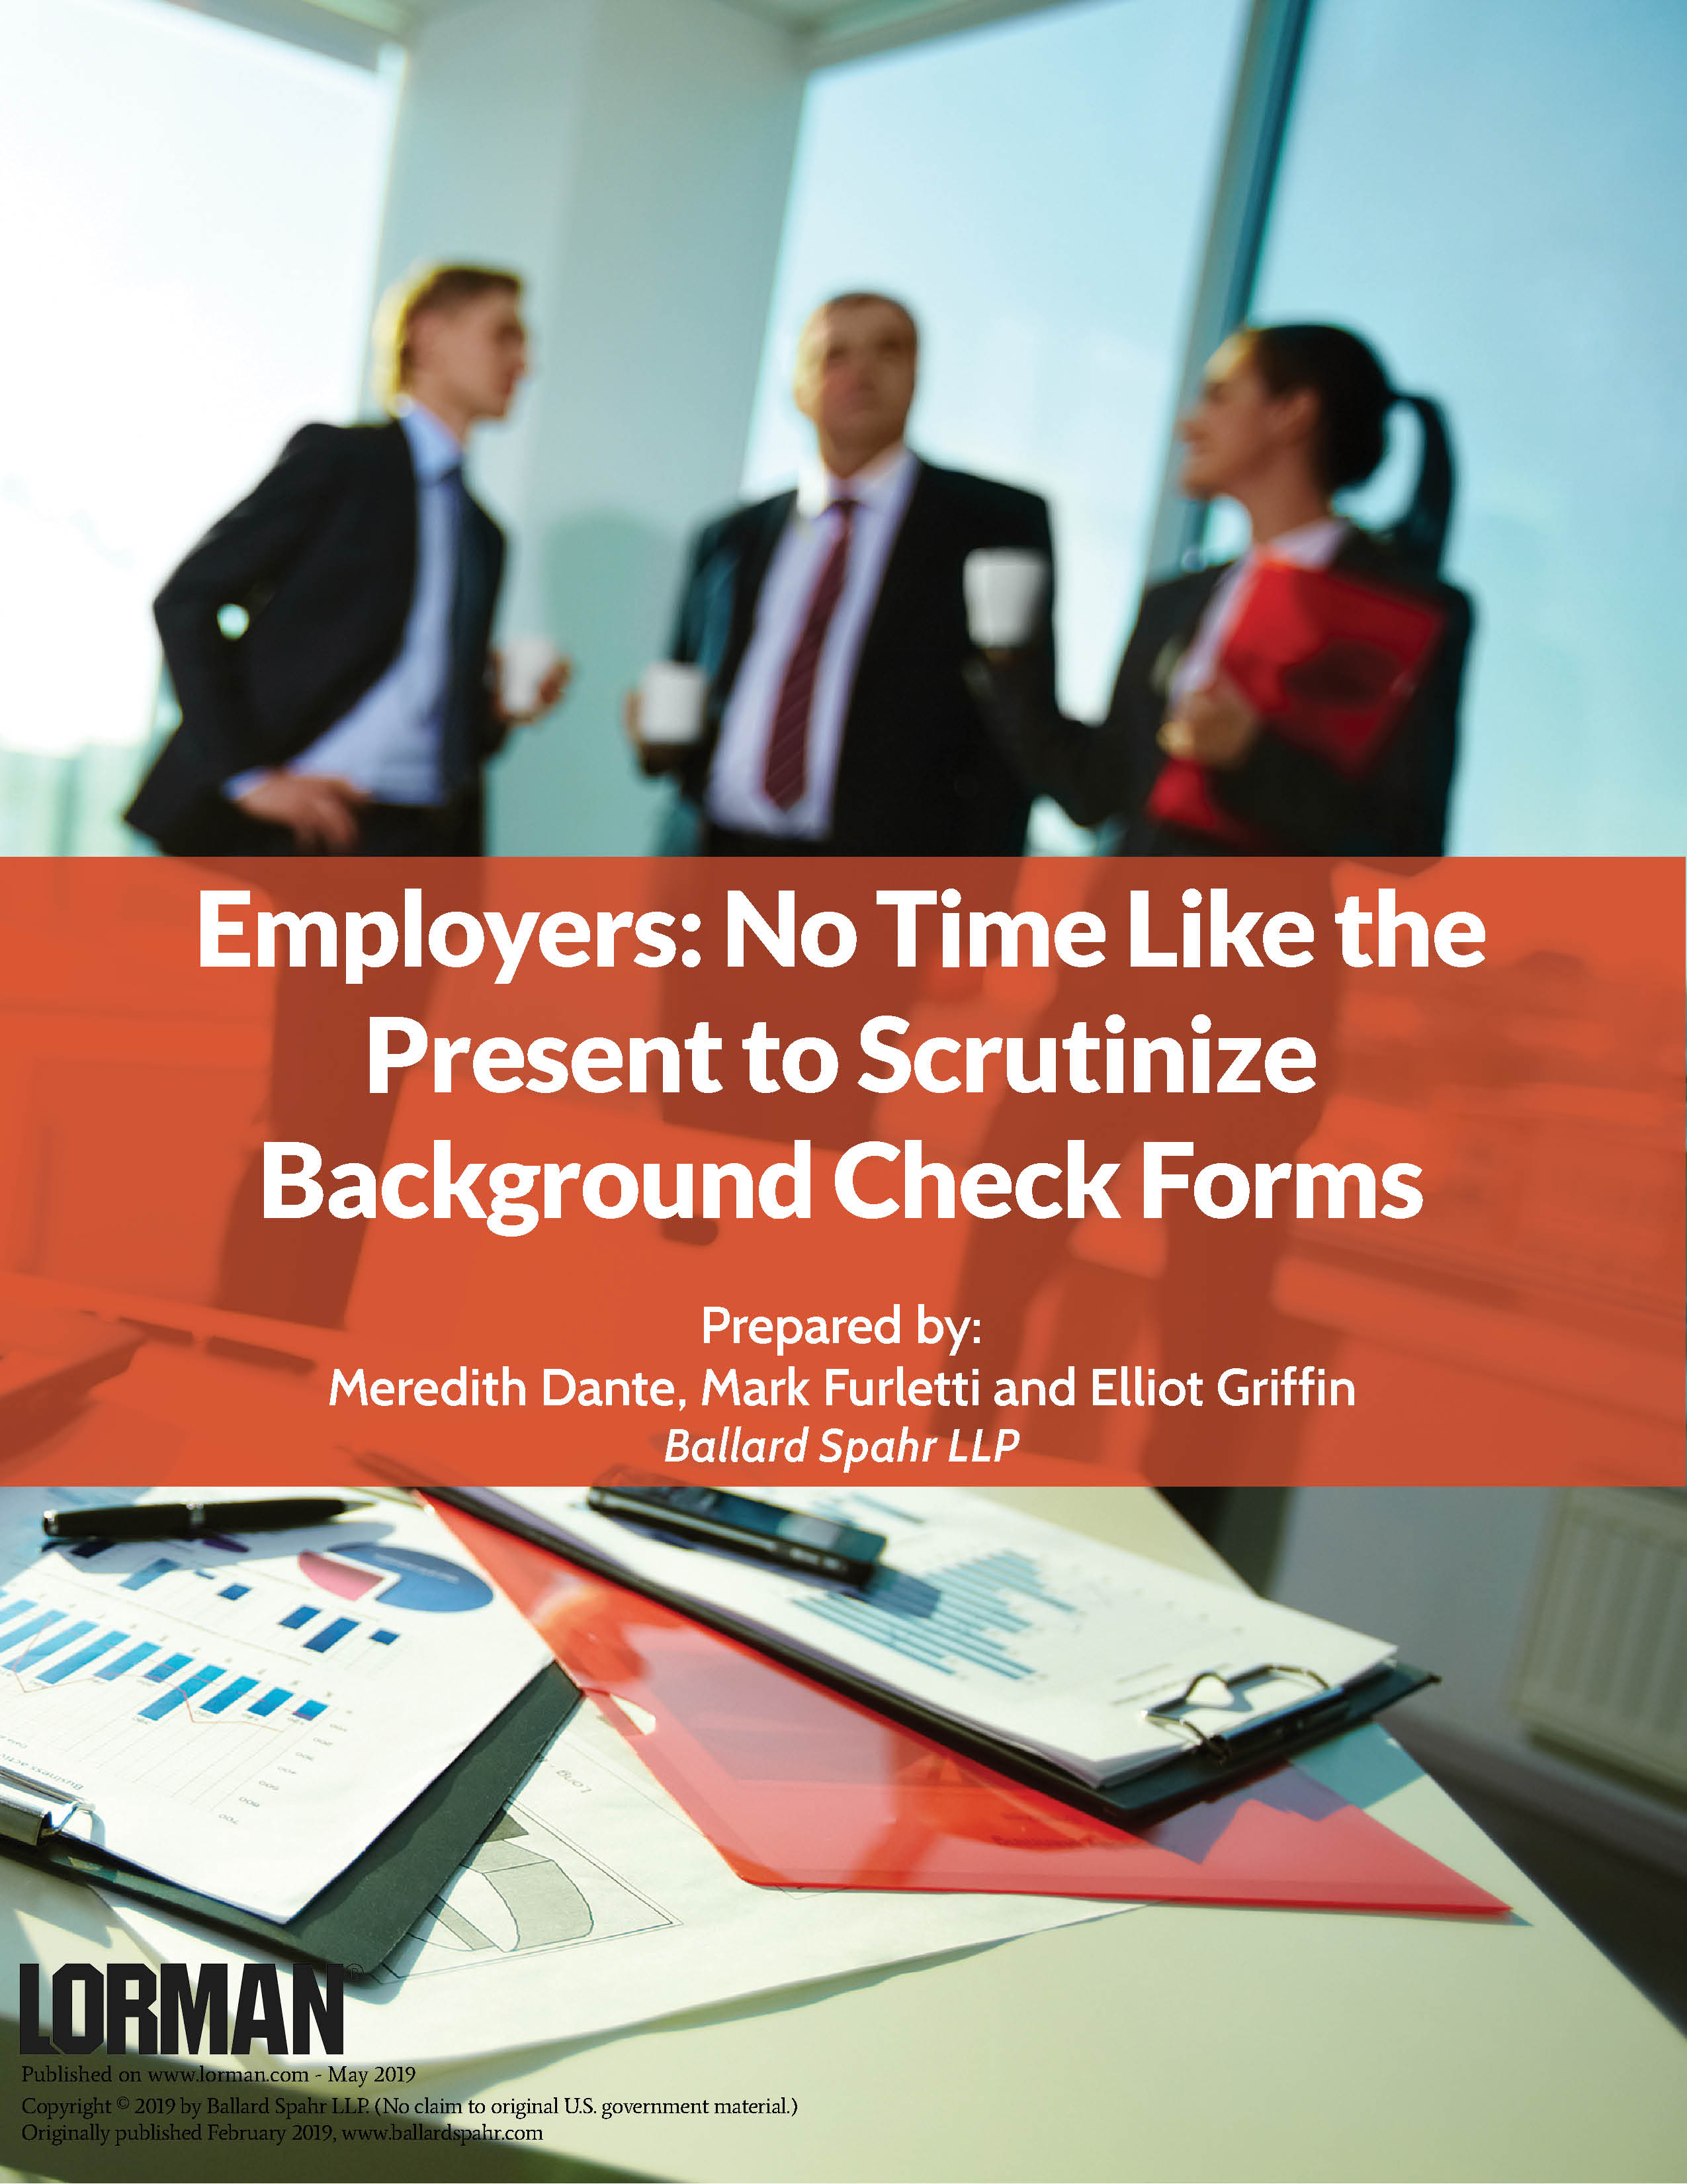 Employers: No Time Like the Present to Scrutinize Background Check Forms